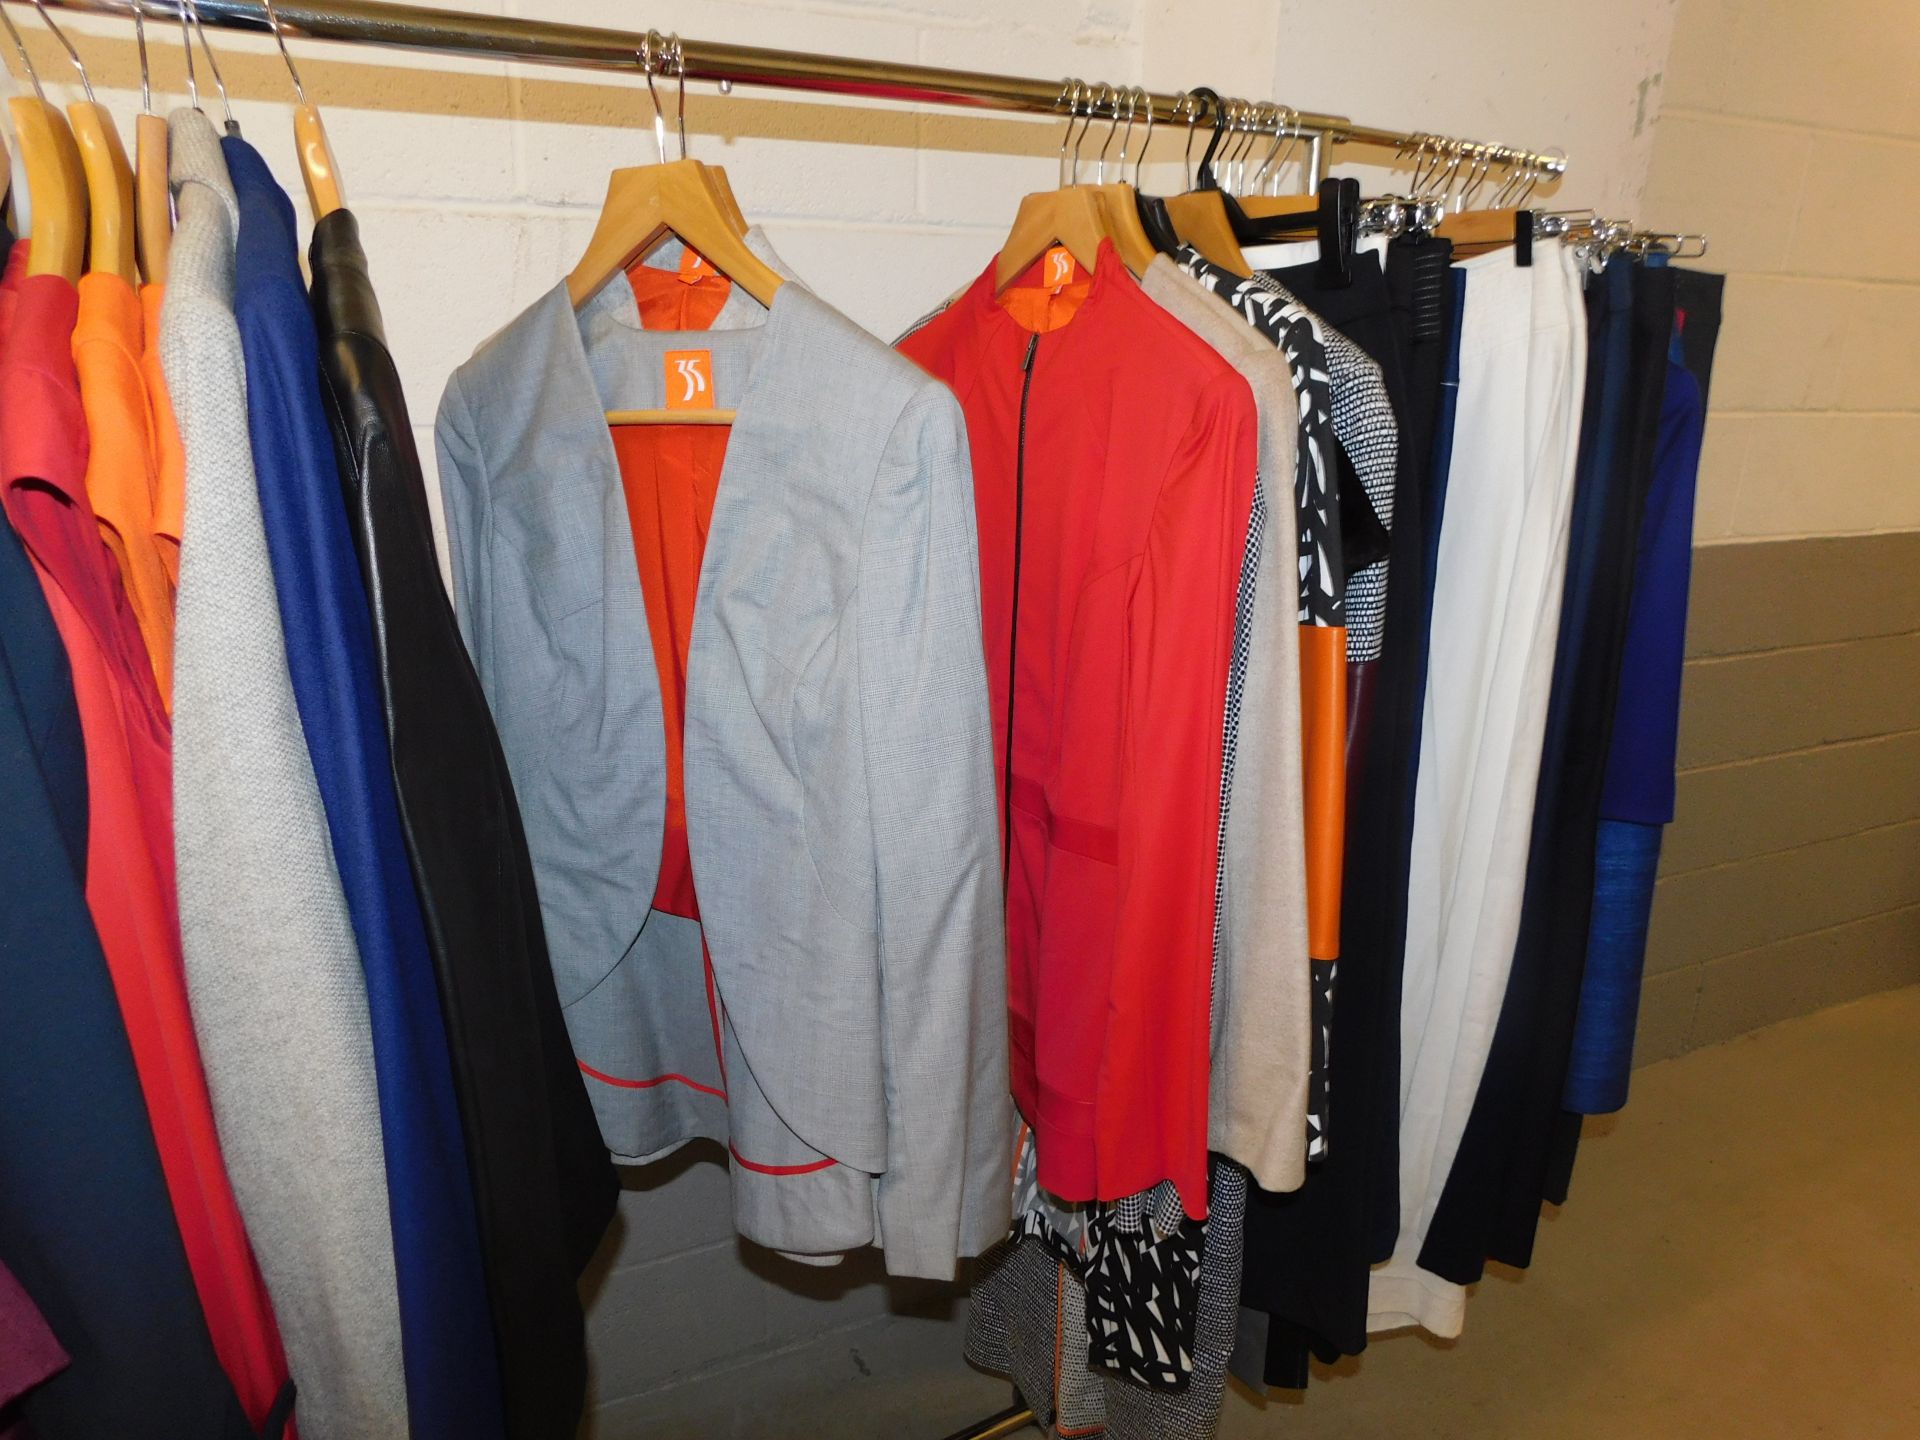 Contents of Rail of "Number 35" Ladies Business Wear, Size 10 (21 Skirts, 9 Tops/Dresses,  11 Jacket - Image 5 of 7